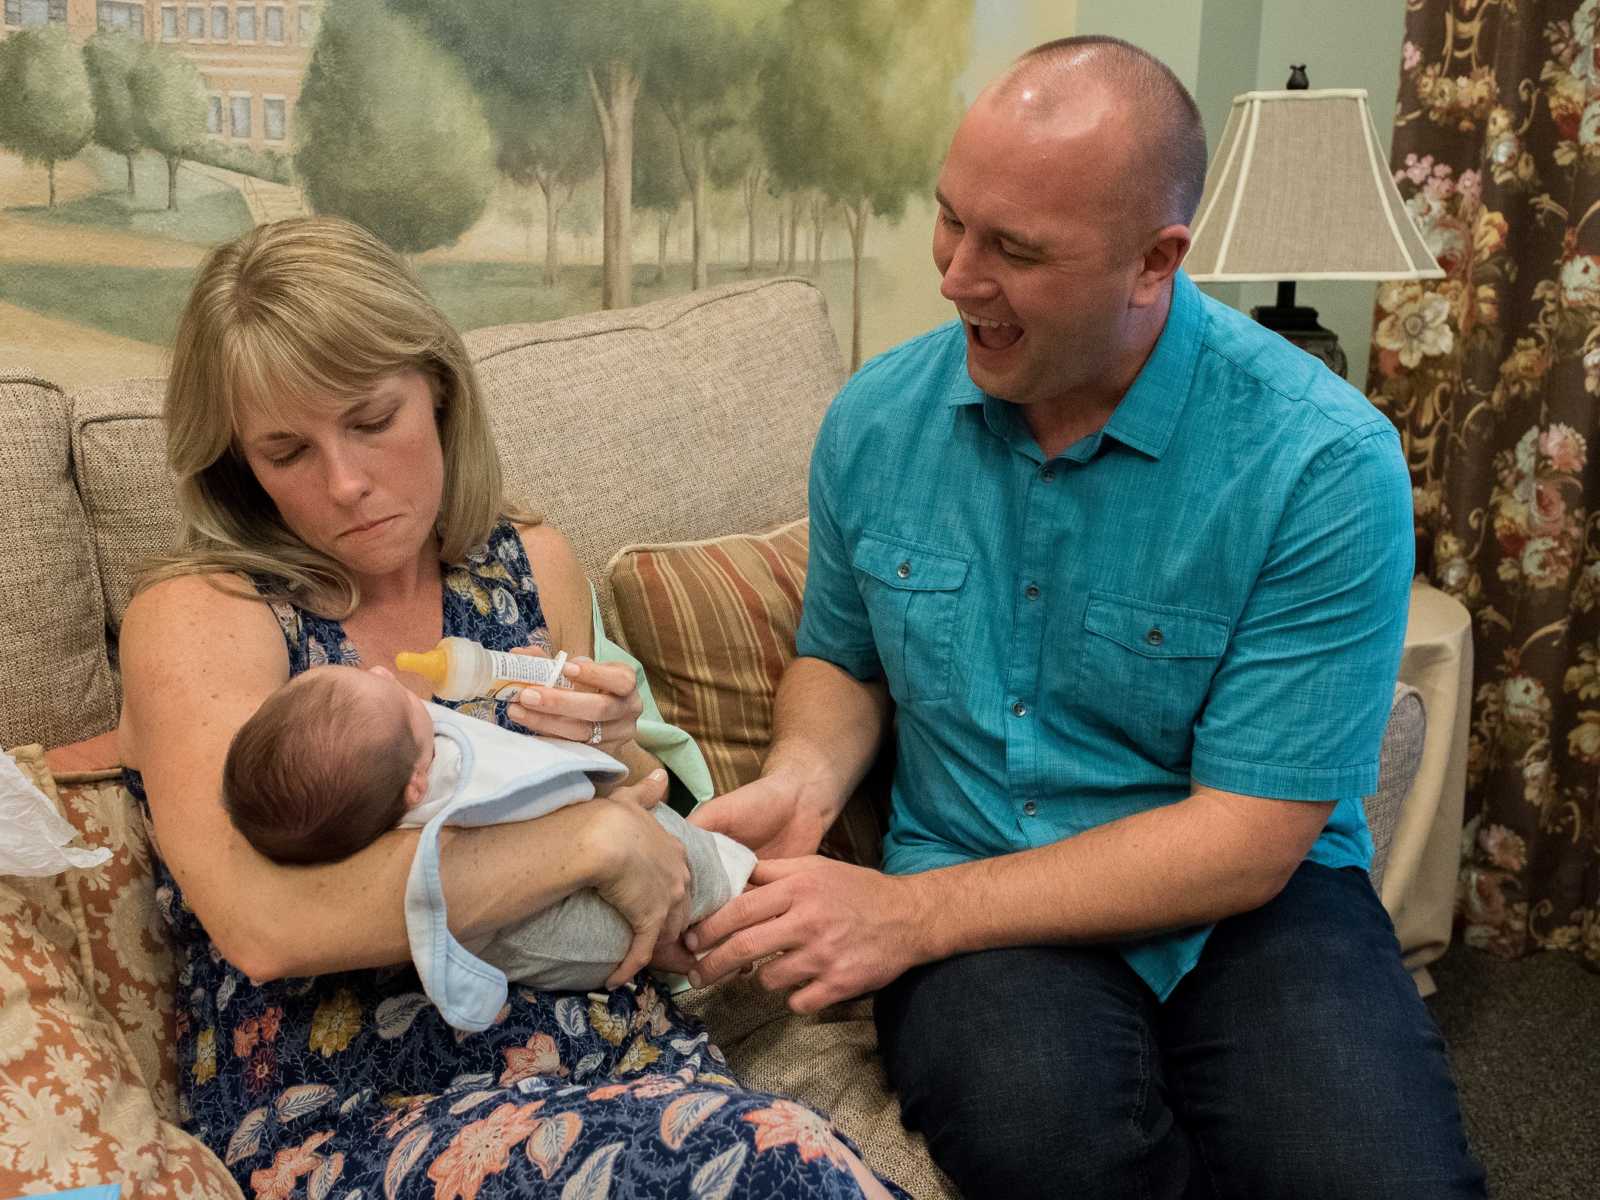 adoptive mother feeds baby with bottle on couch while adopted father looks at son with mouth open